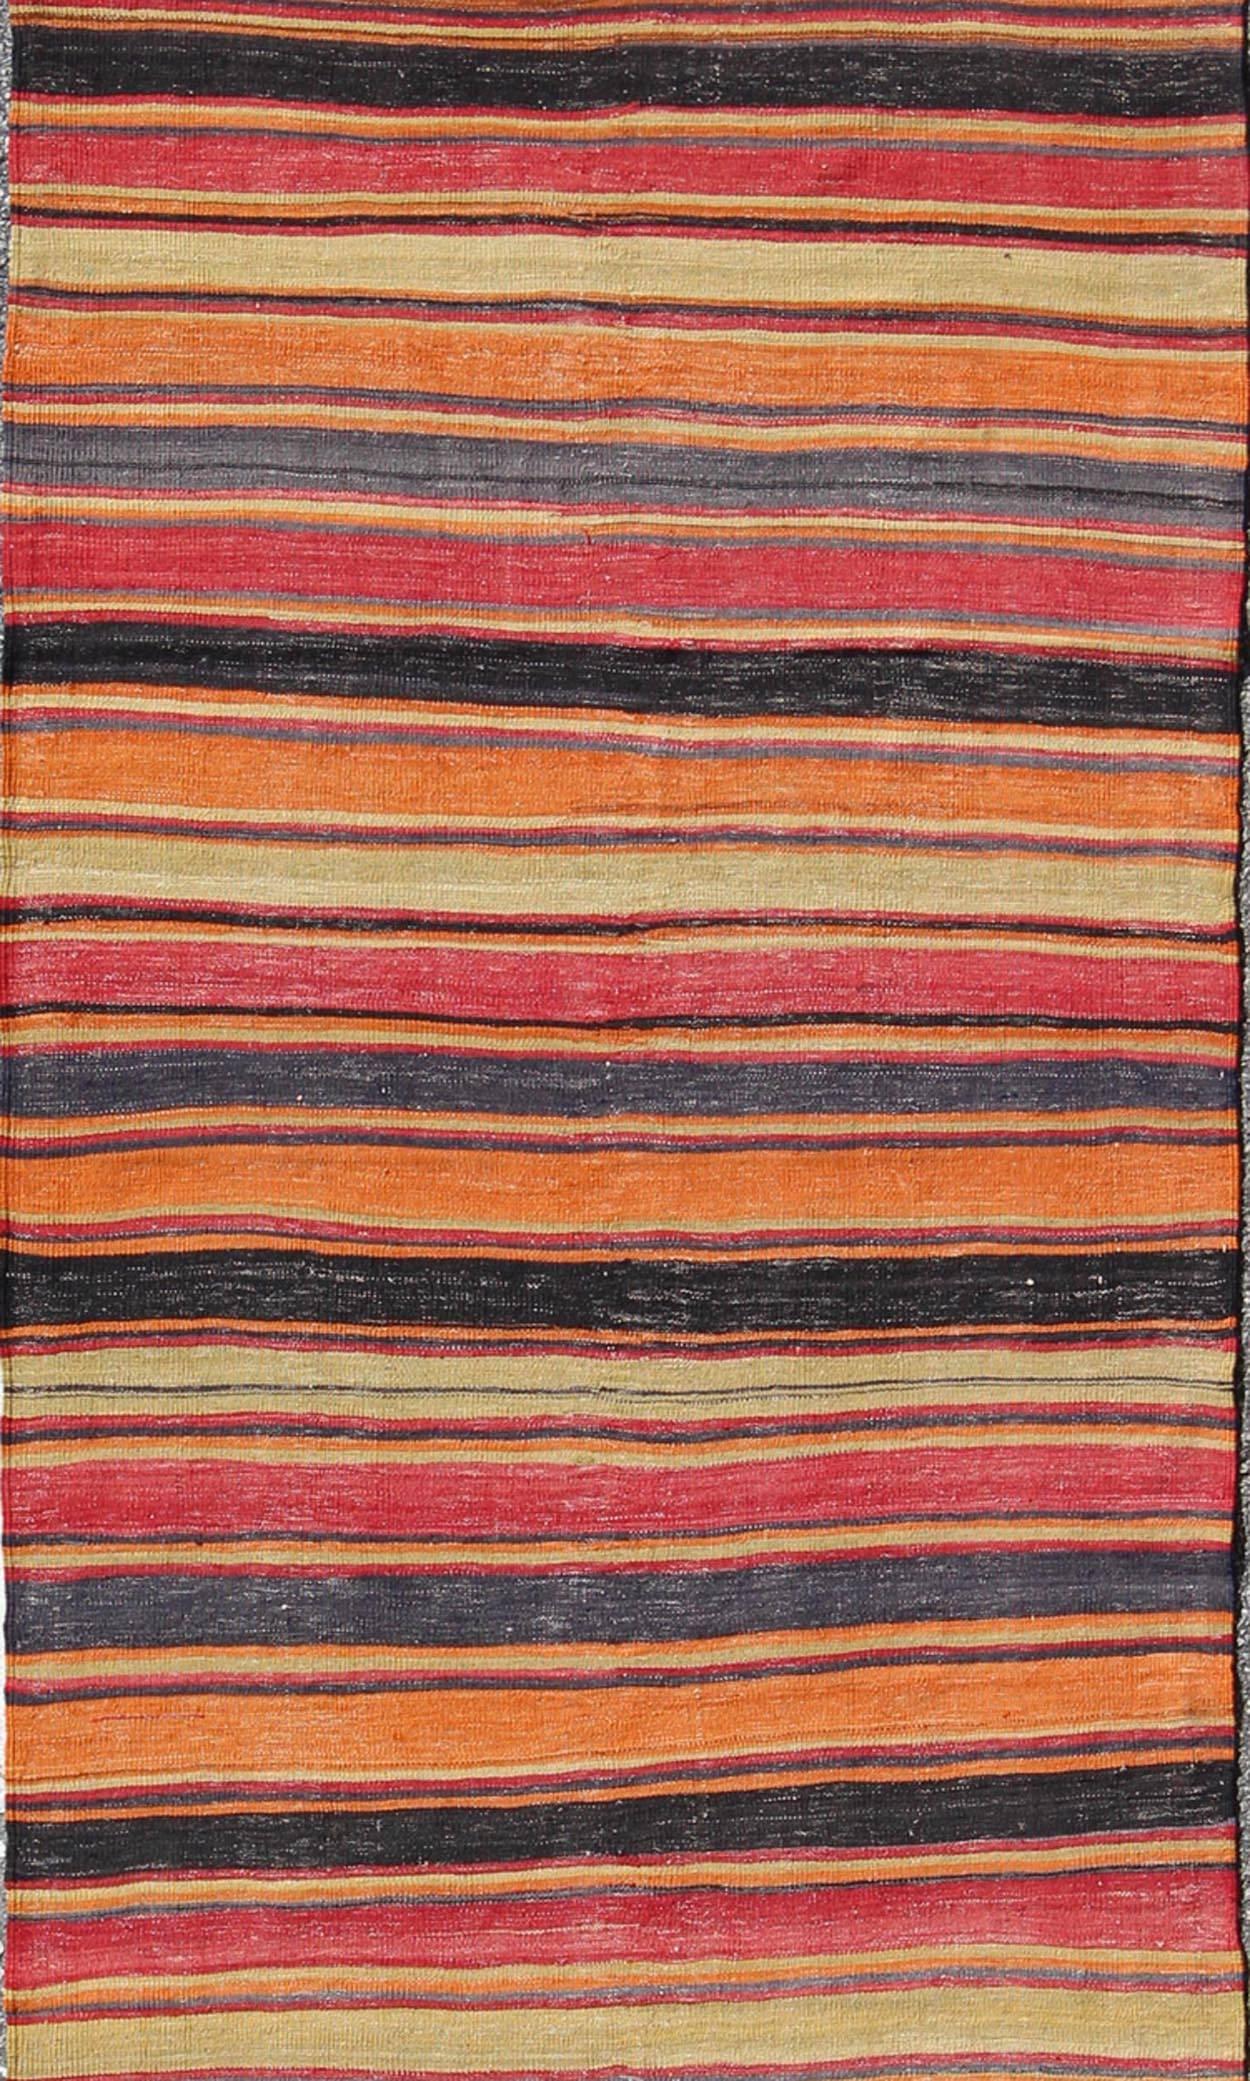 Hand-Woven Multicolored Vintage Turkish Kilim Rug with Horizontal Stripe Design For Sale